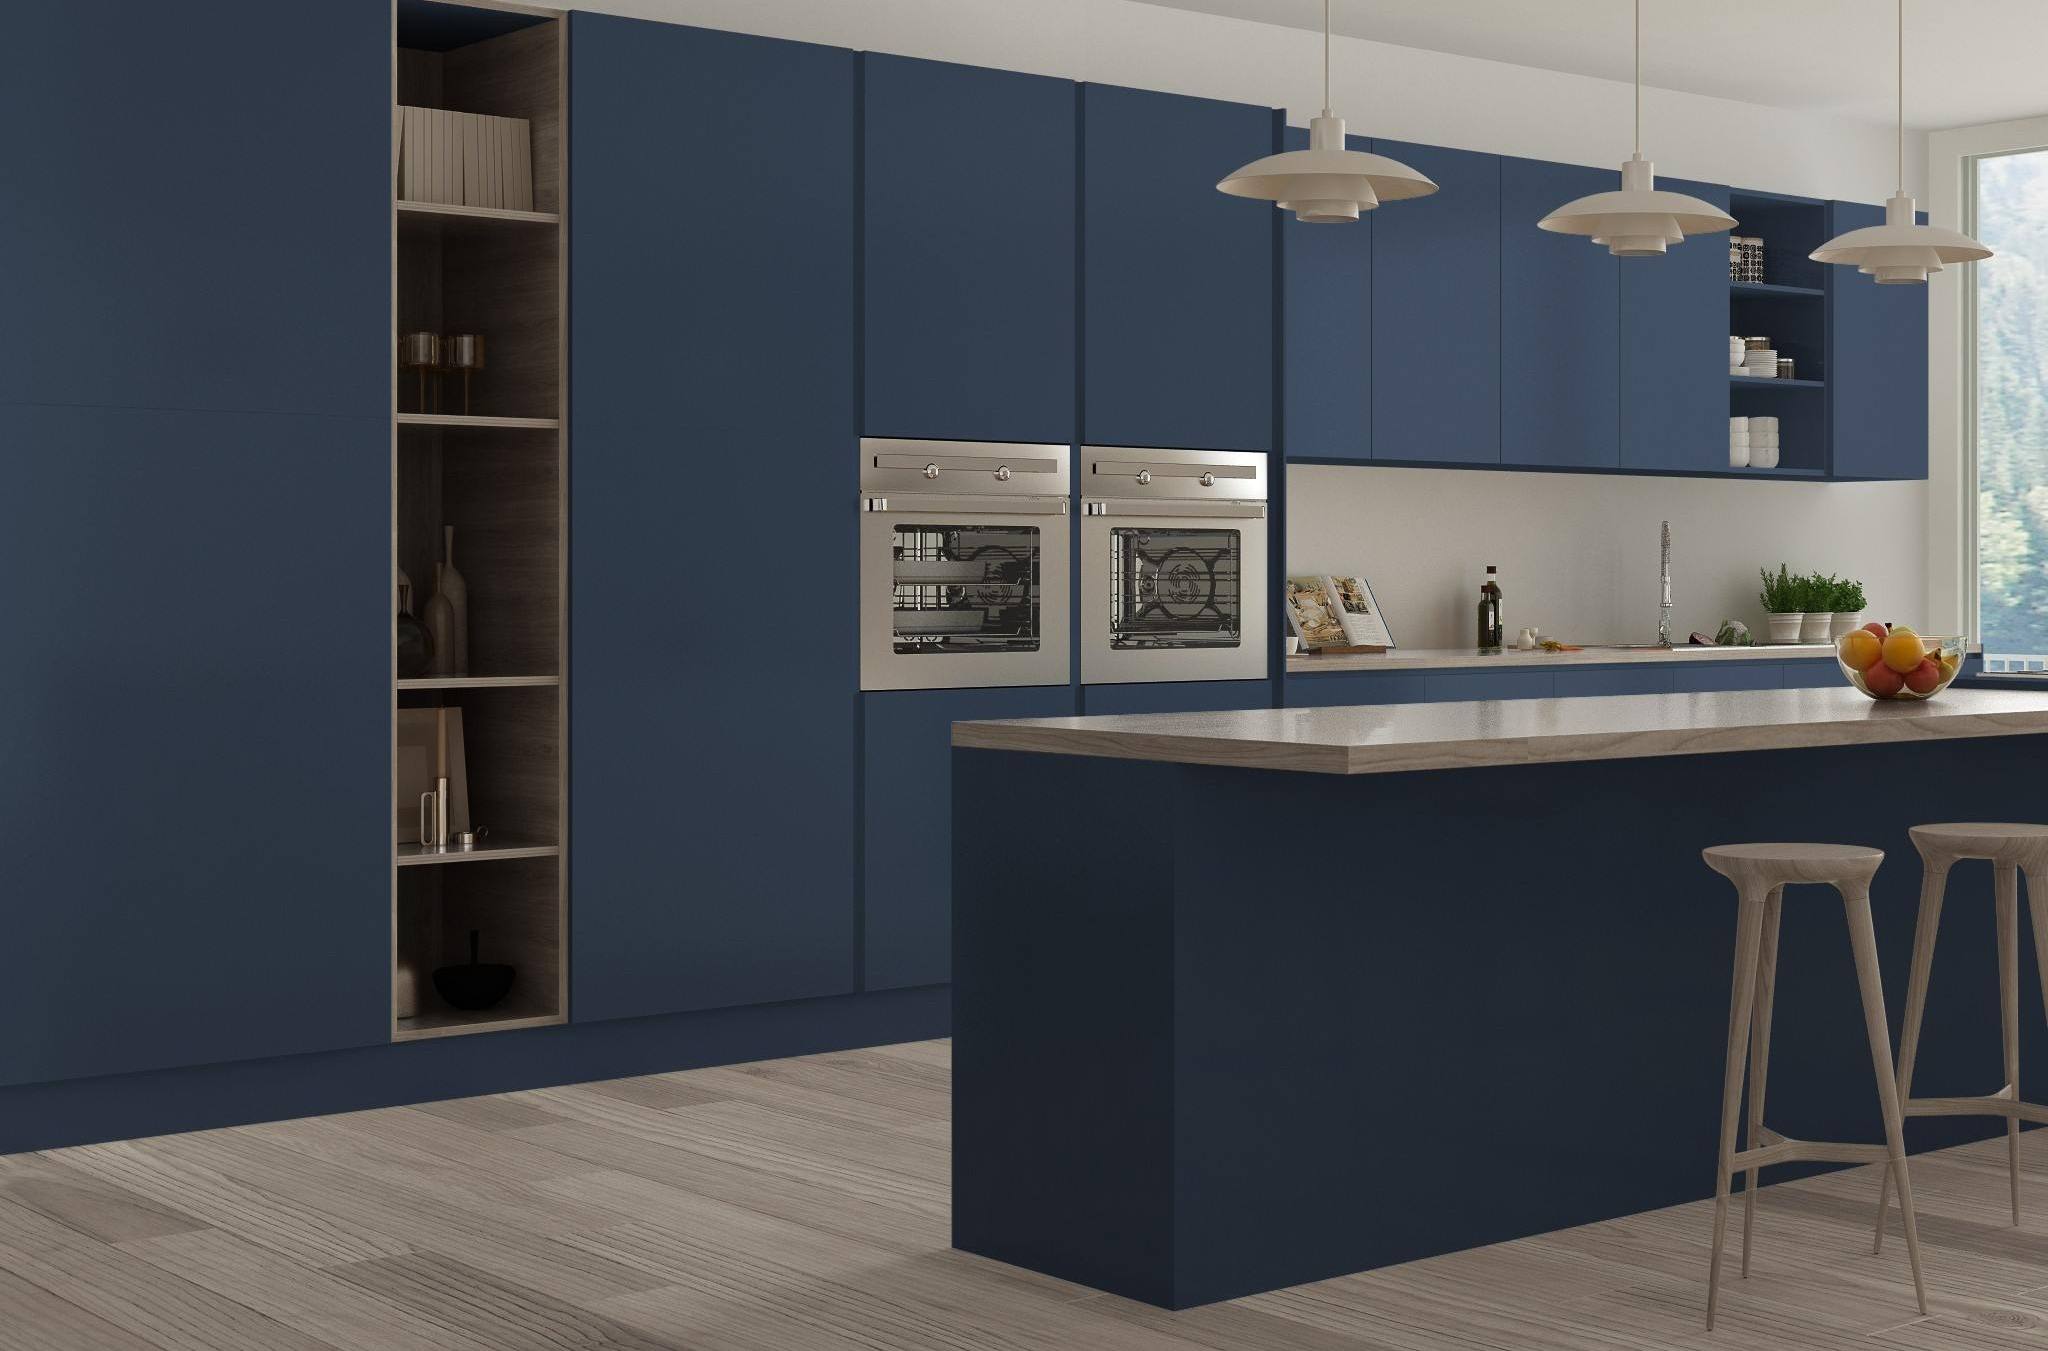 8 Top Kitchen Cabinet Color Trends in 2023